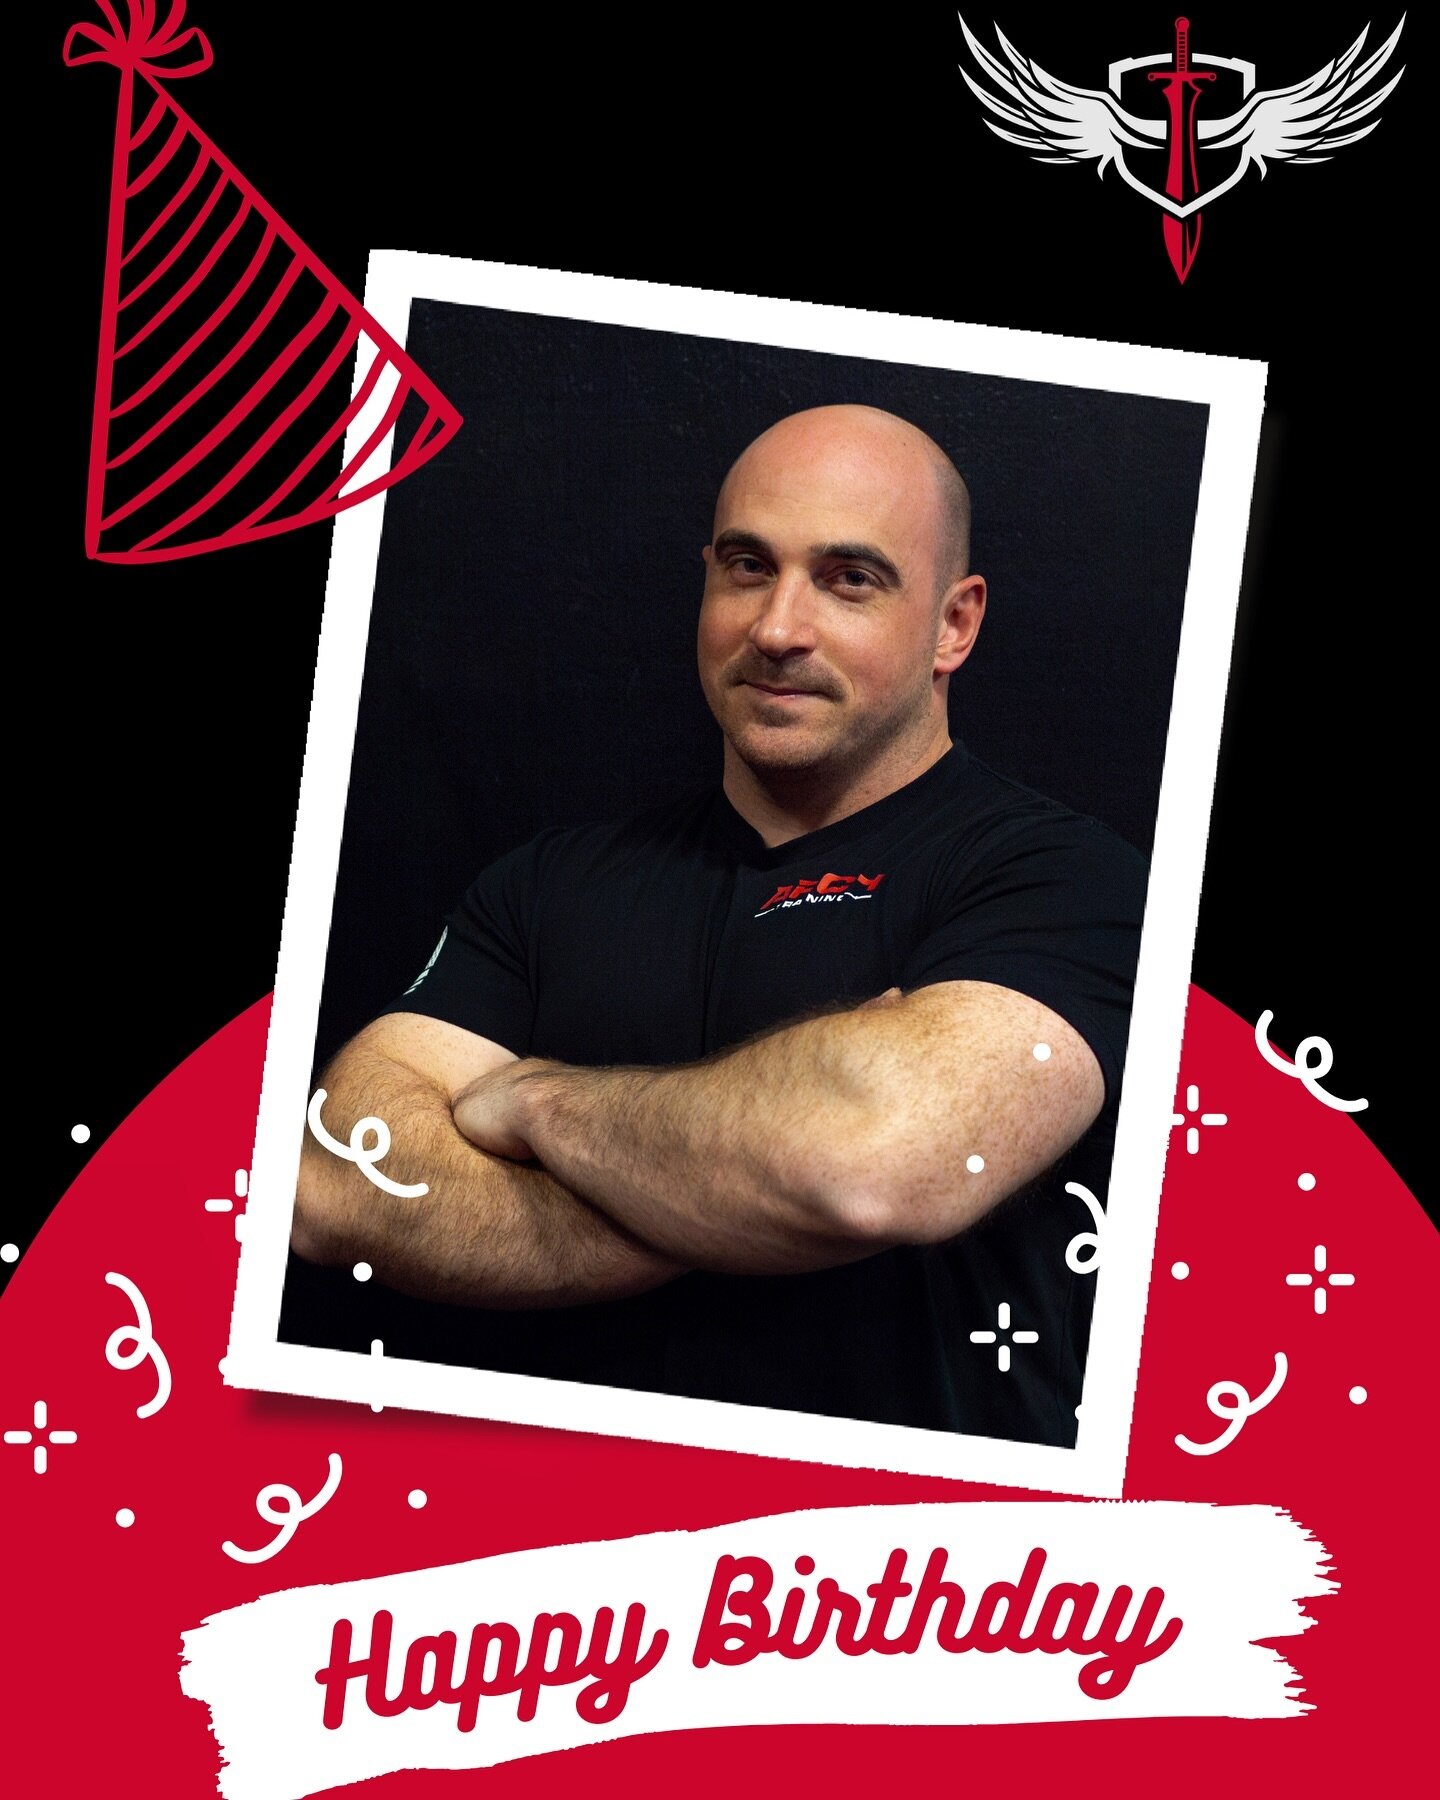 🥳Wishing a VERY happy birthday to our very own, Jordan @jordan.kaufman1 !! 💪
⚫️Thank you so much for all of your hard work and dedication to make ARCH Training what it is today. It all started with you! 
🎉Please join us in the comments below and w